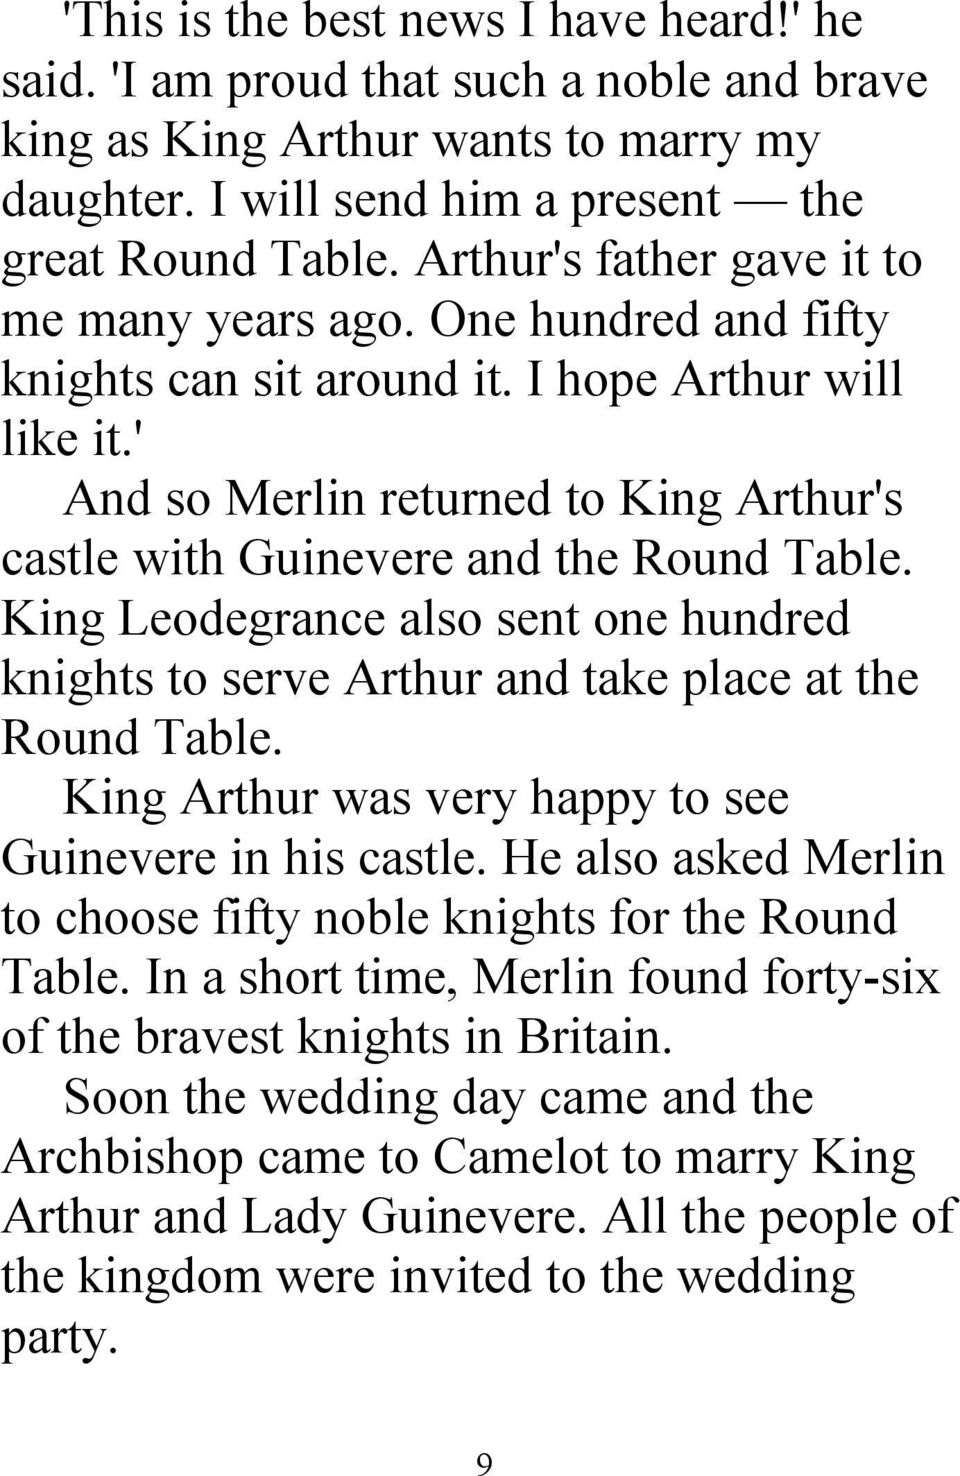 ' And so Merlin returned to King Arthur's castle with Guinevere and the Round Table. King Leodegrance also sent one hundred knights to serve Arthur and take place at the Round Table.